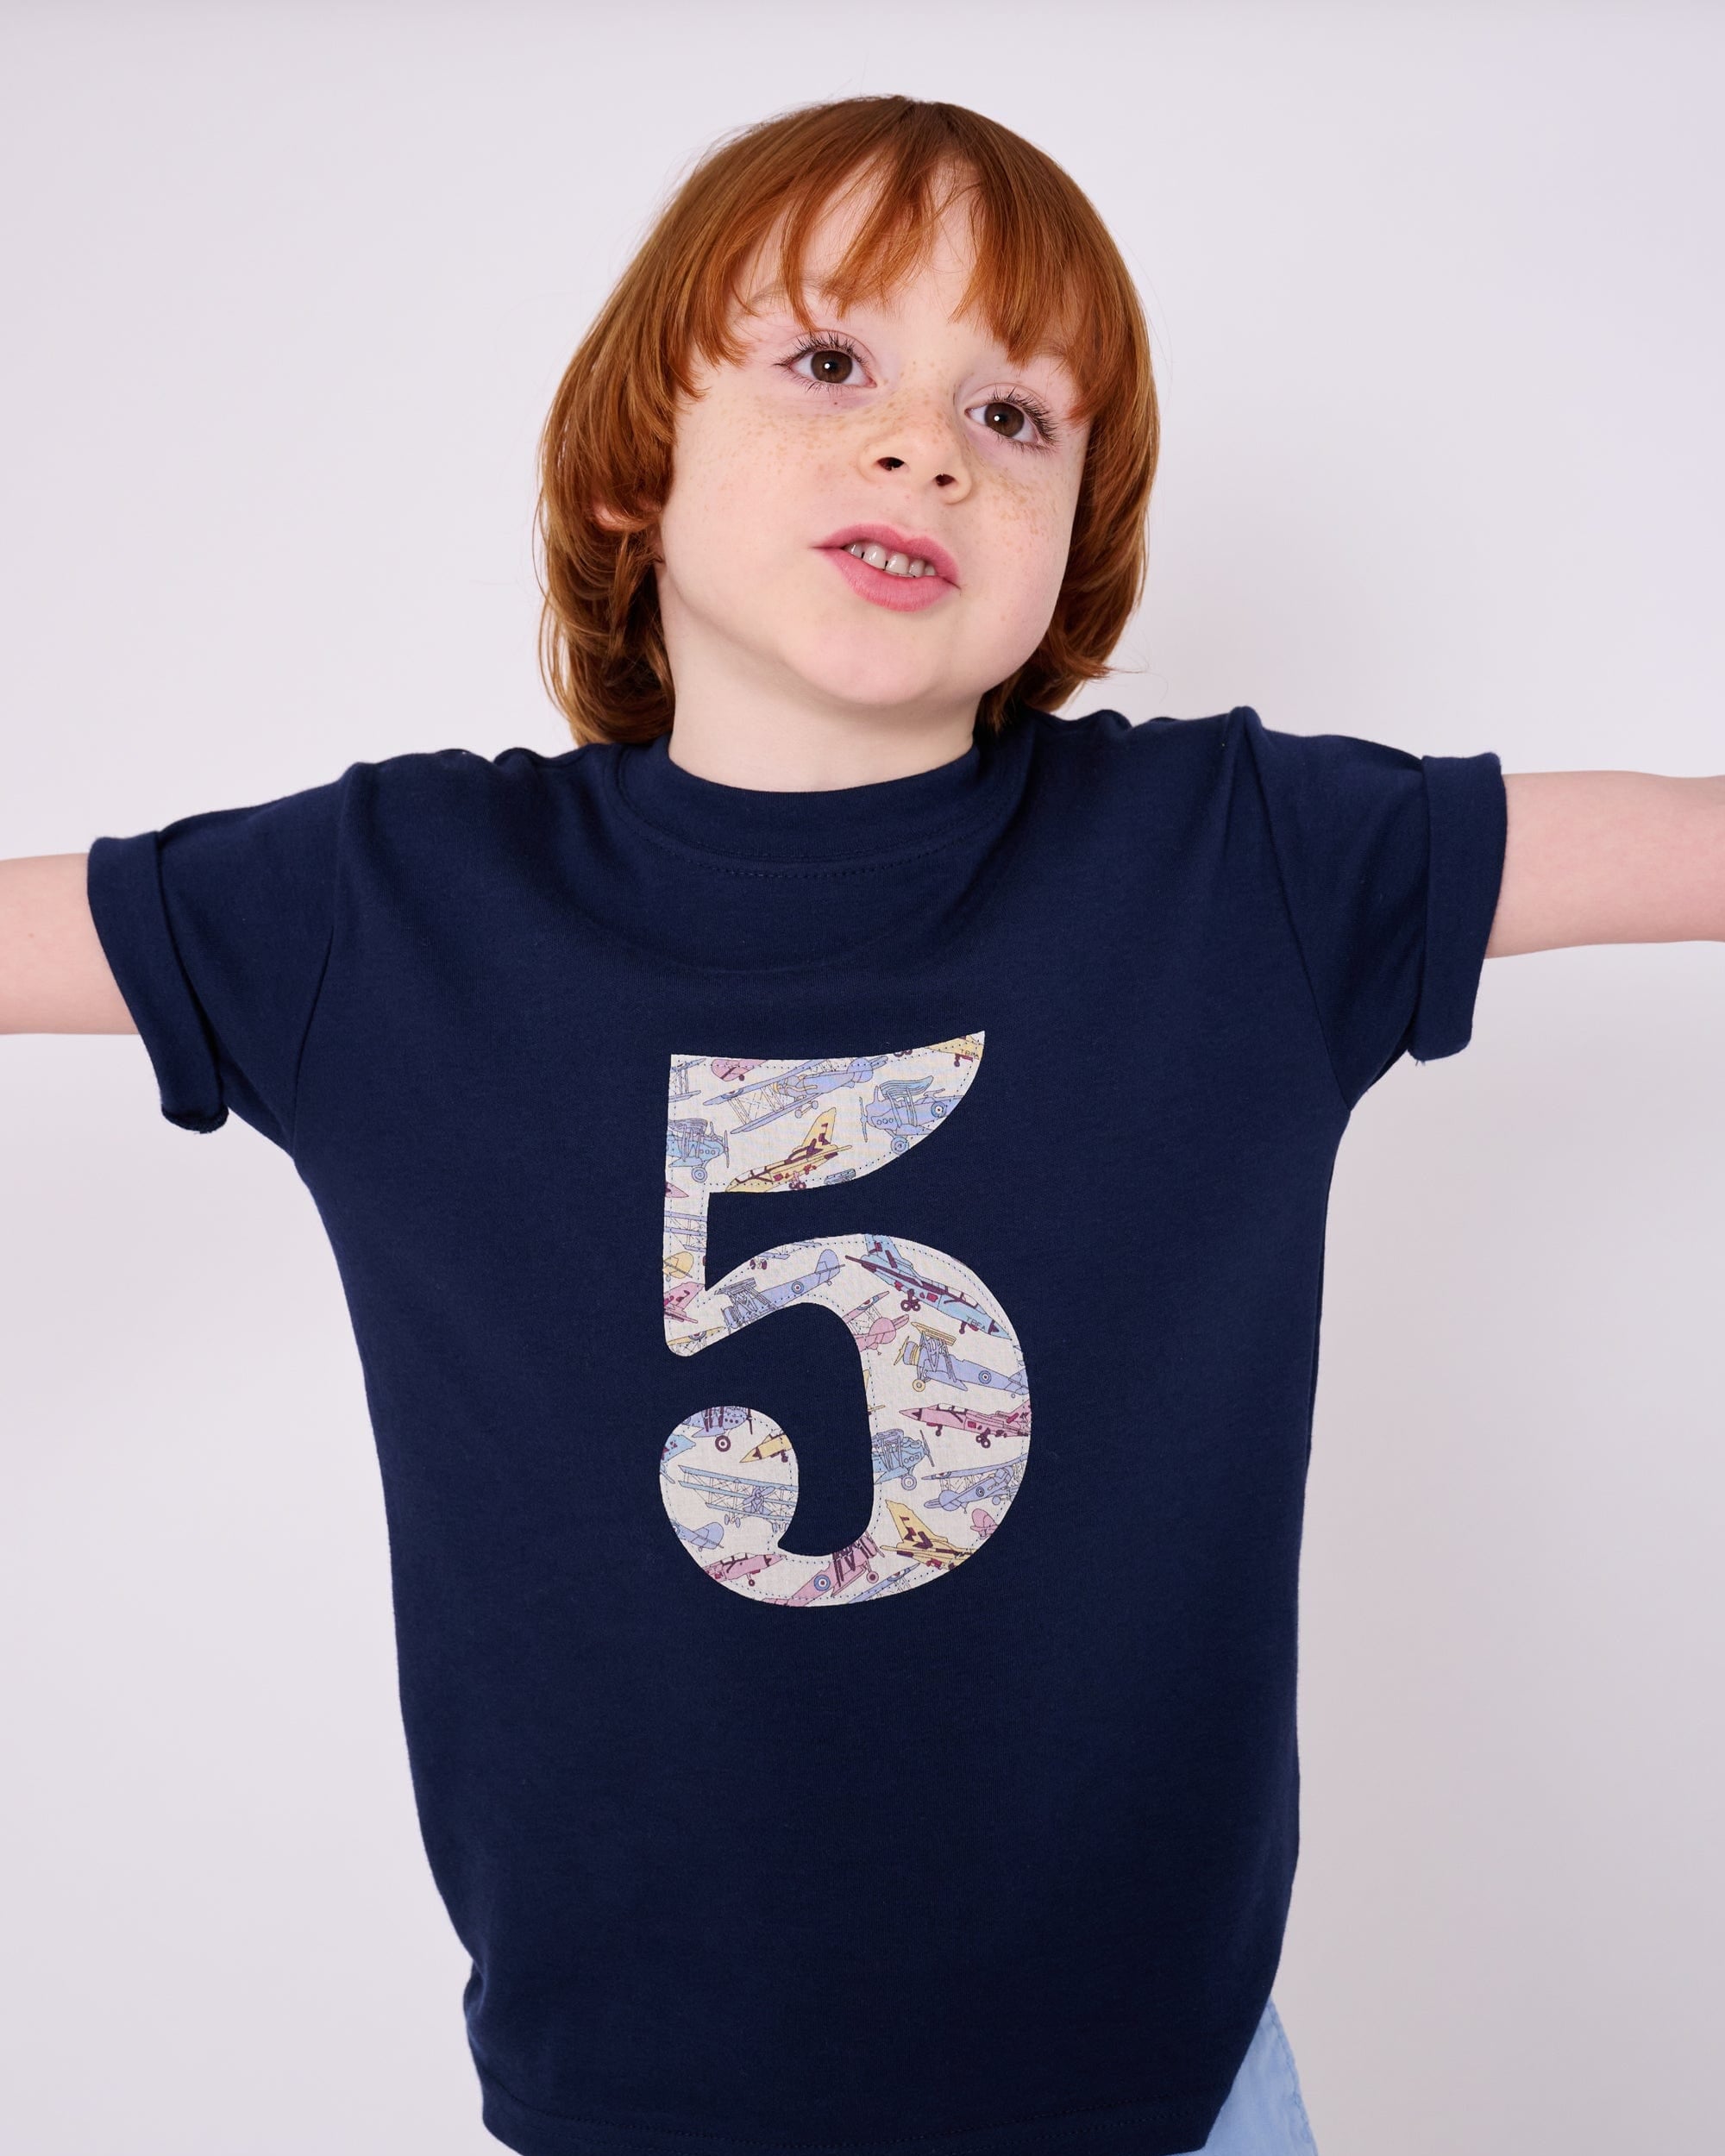 Magnificent Stanley Tee Number Navy T-Shirt in Tom's Jet Liberty Print